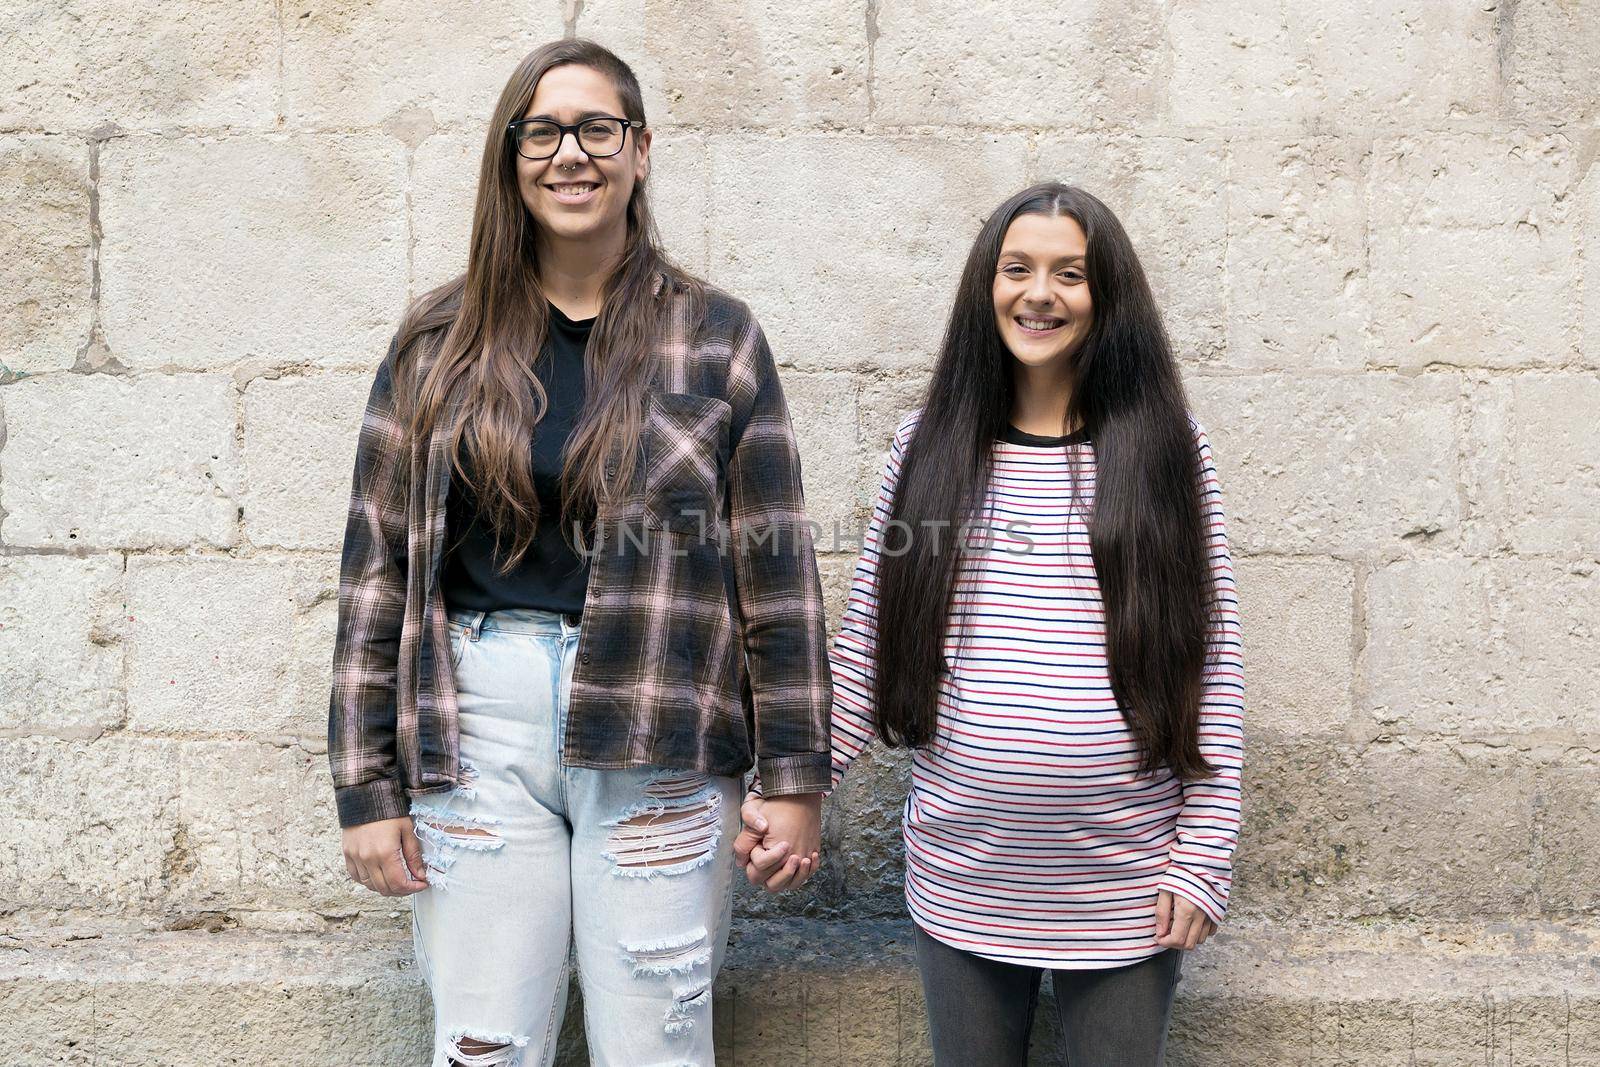 Two young lesbians holding each other and standing near a stone wall, smiling, happy. High quality photo